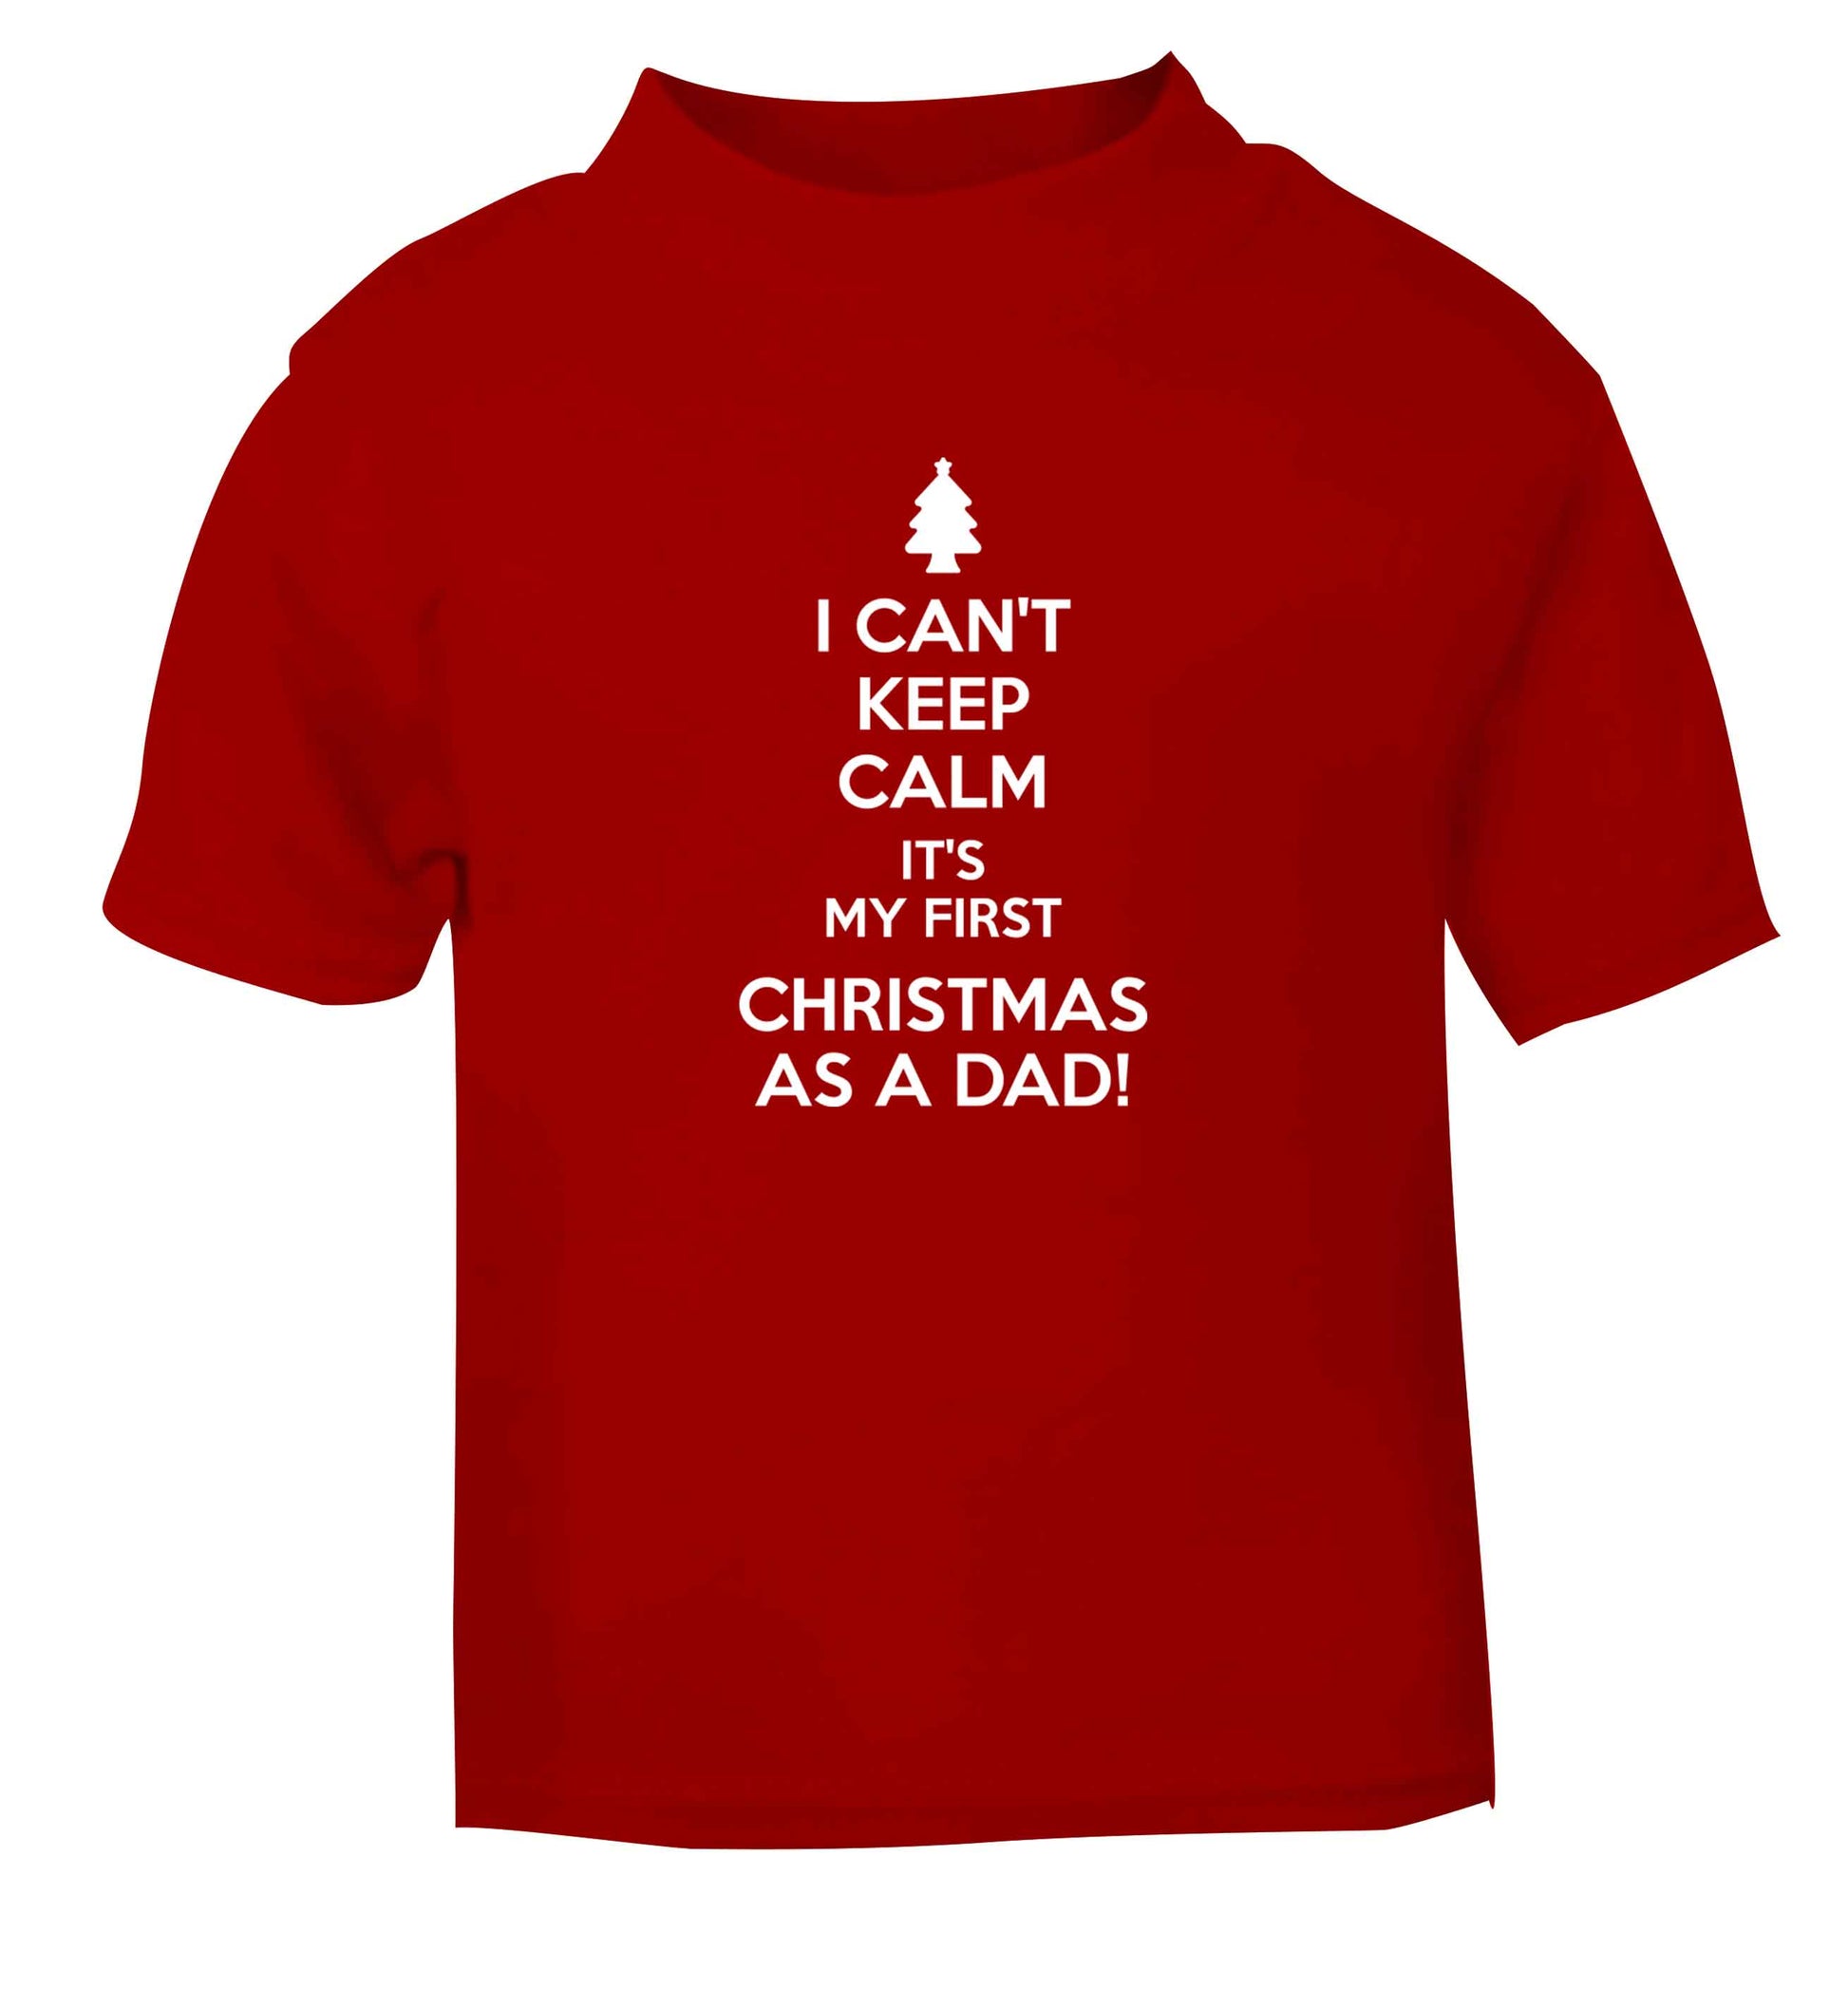 I can't keep calm it's my first Christmas as a dad red Baby Toddler Tshirt 2 Years